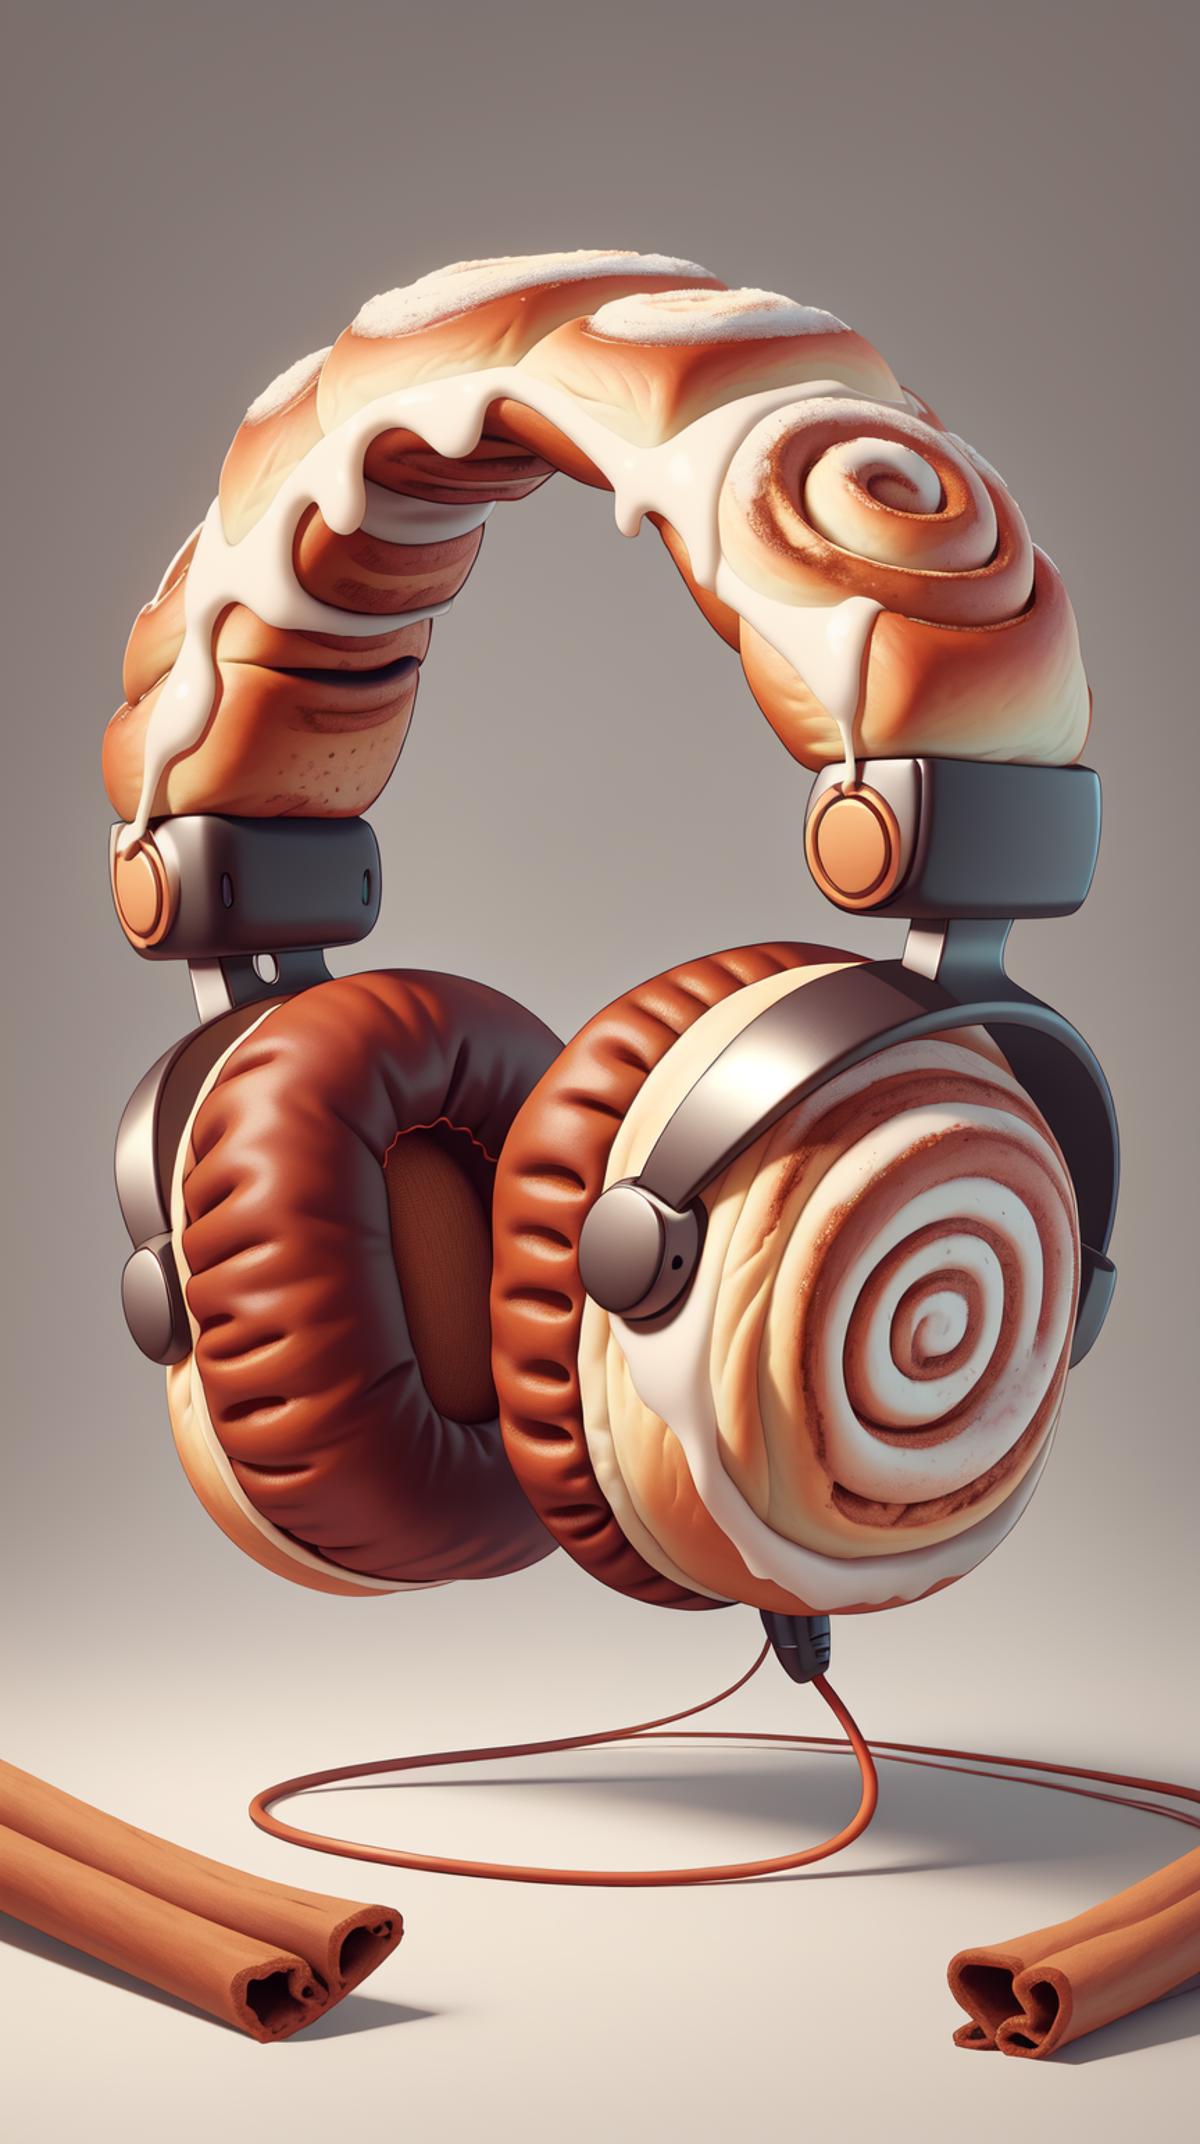 A 3D model of a headphone with a donut design.